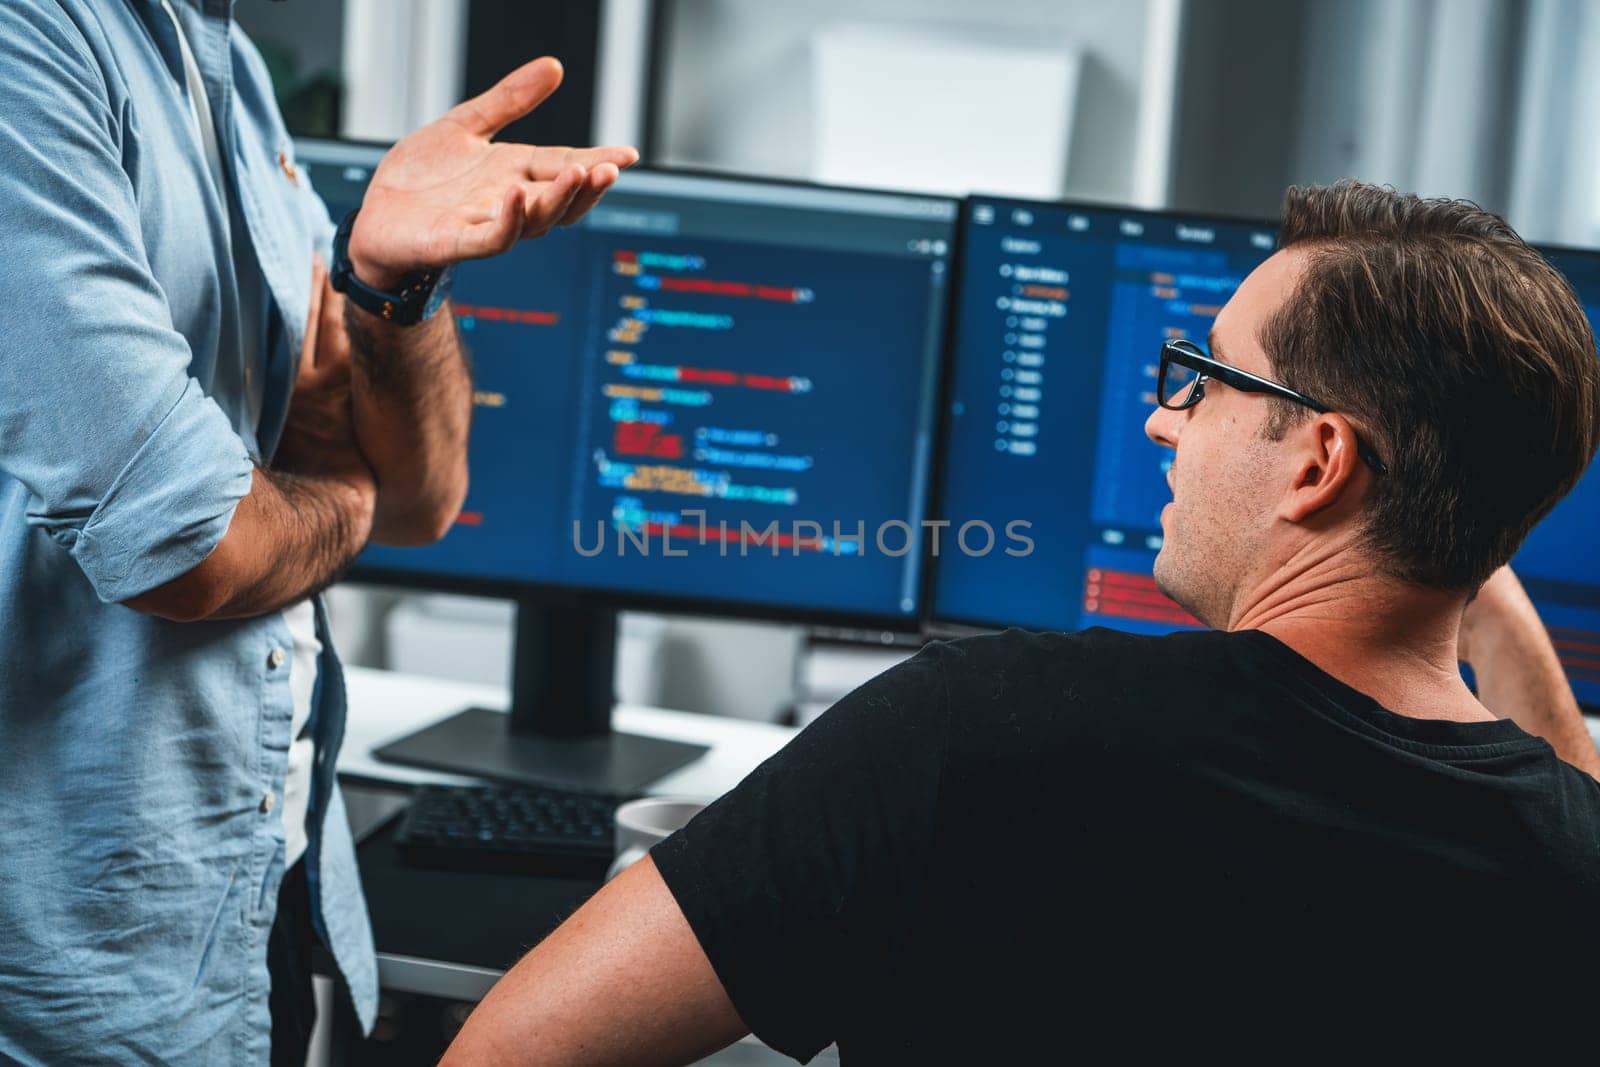 IT developers discussing online software development information on pc screen, creating program coding for latest version application on website. Concept of brainstorming firmware updated. Sellable.